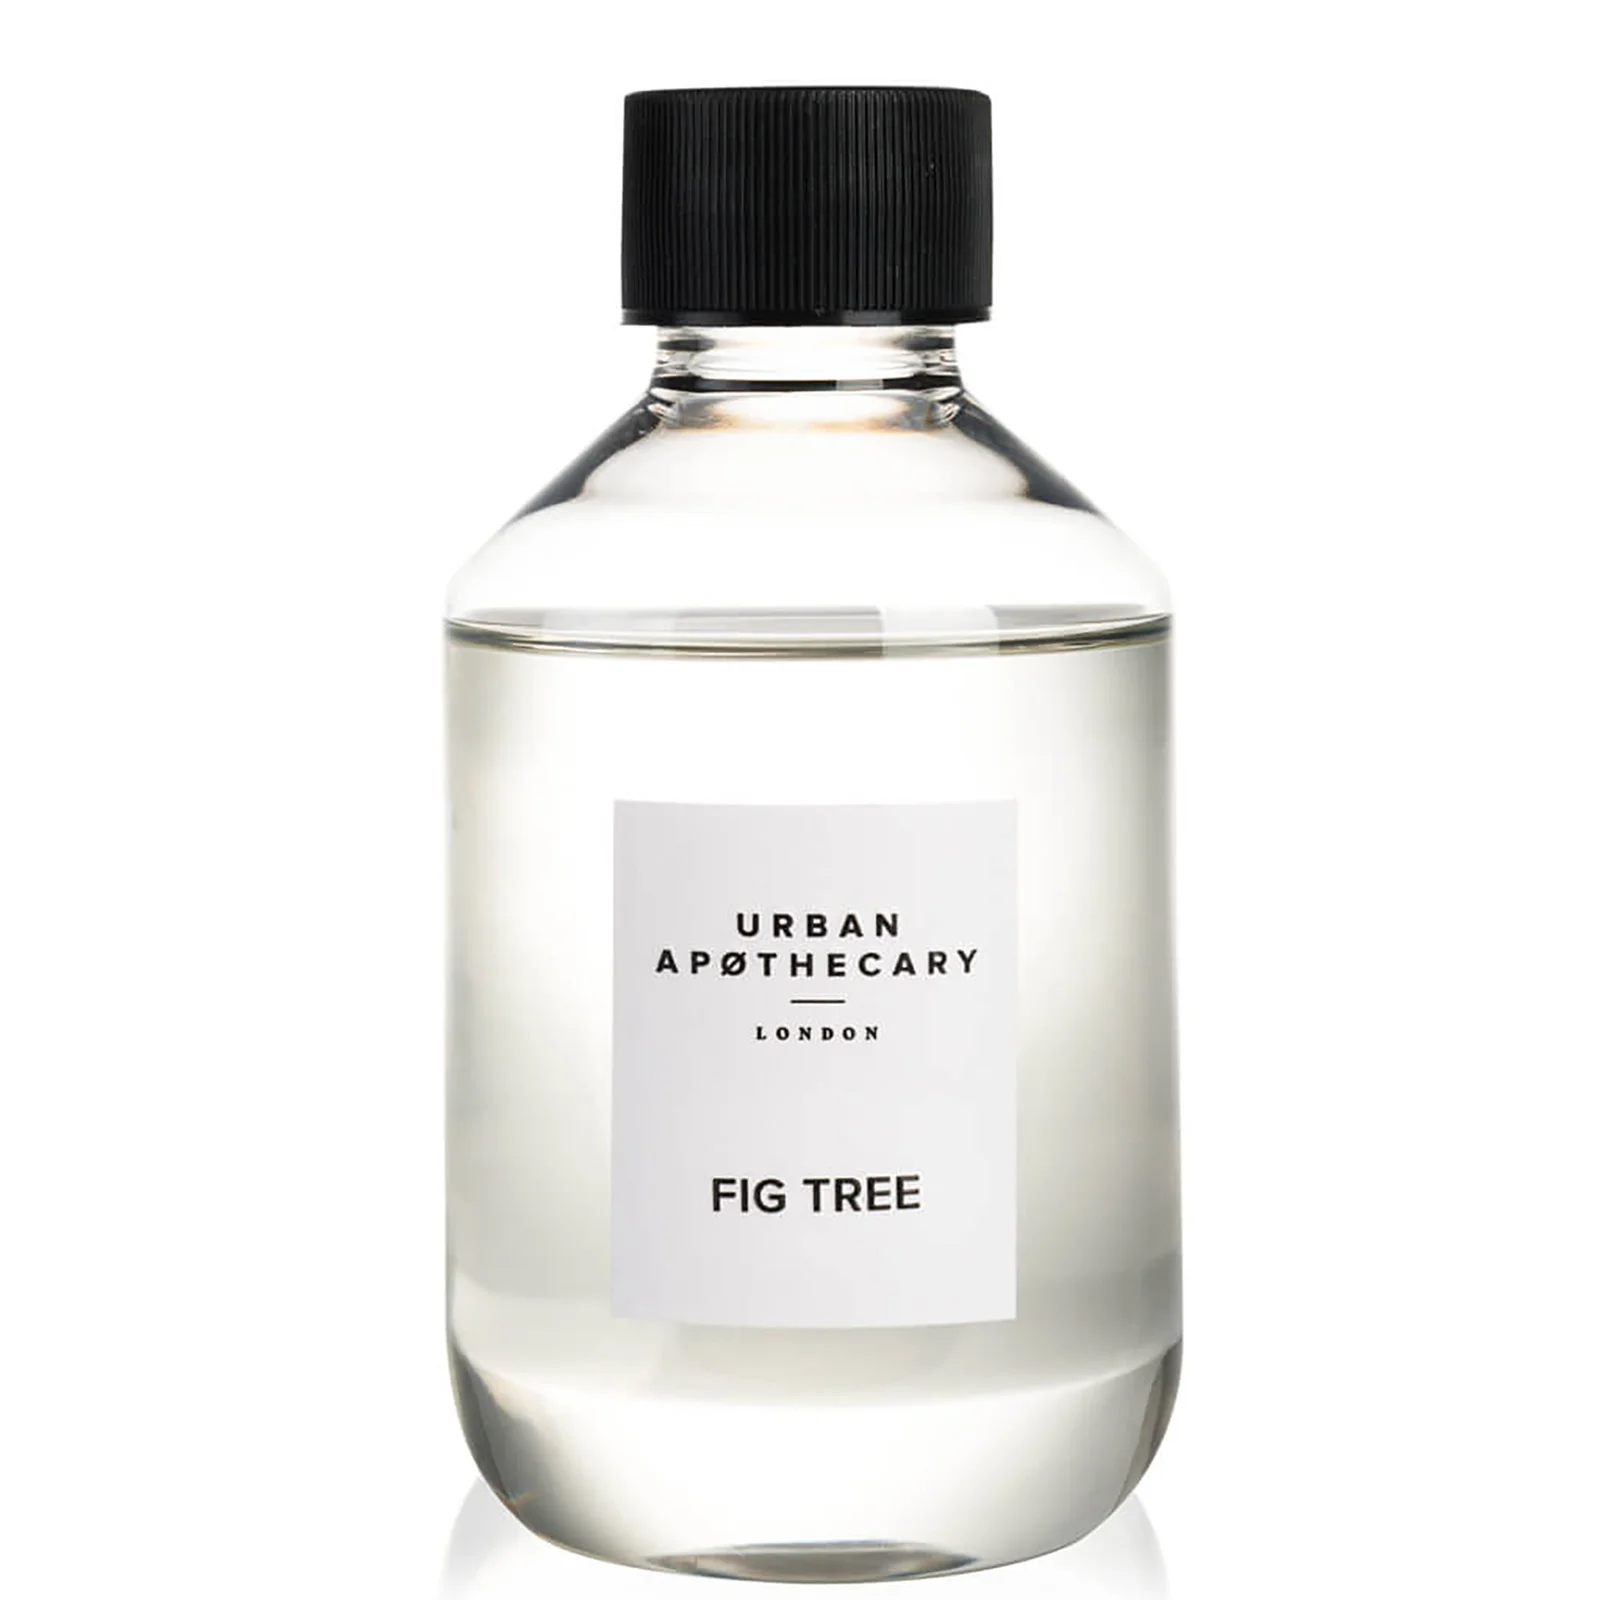 Urban Apothecary Fig Tree Luxury Diffuser Refill 200ml Image 1